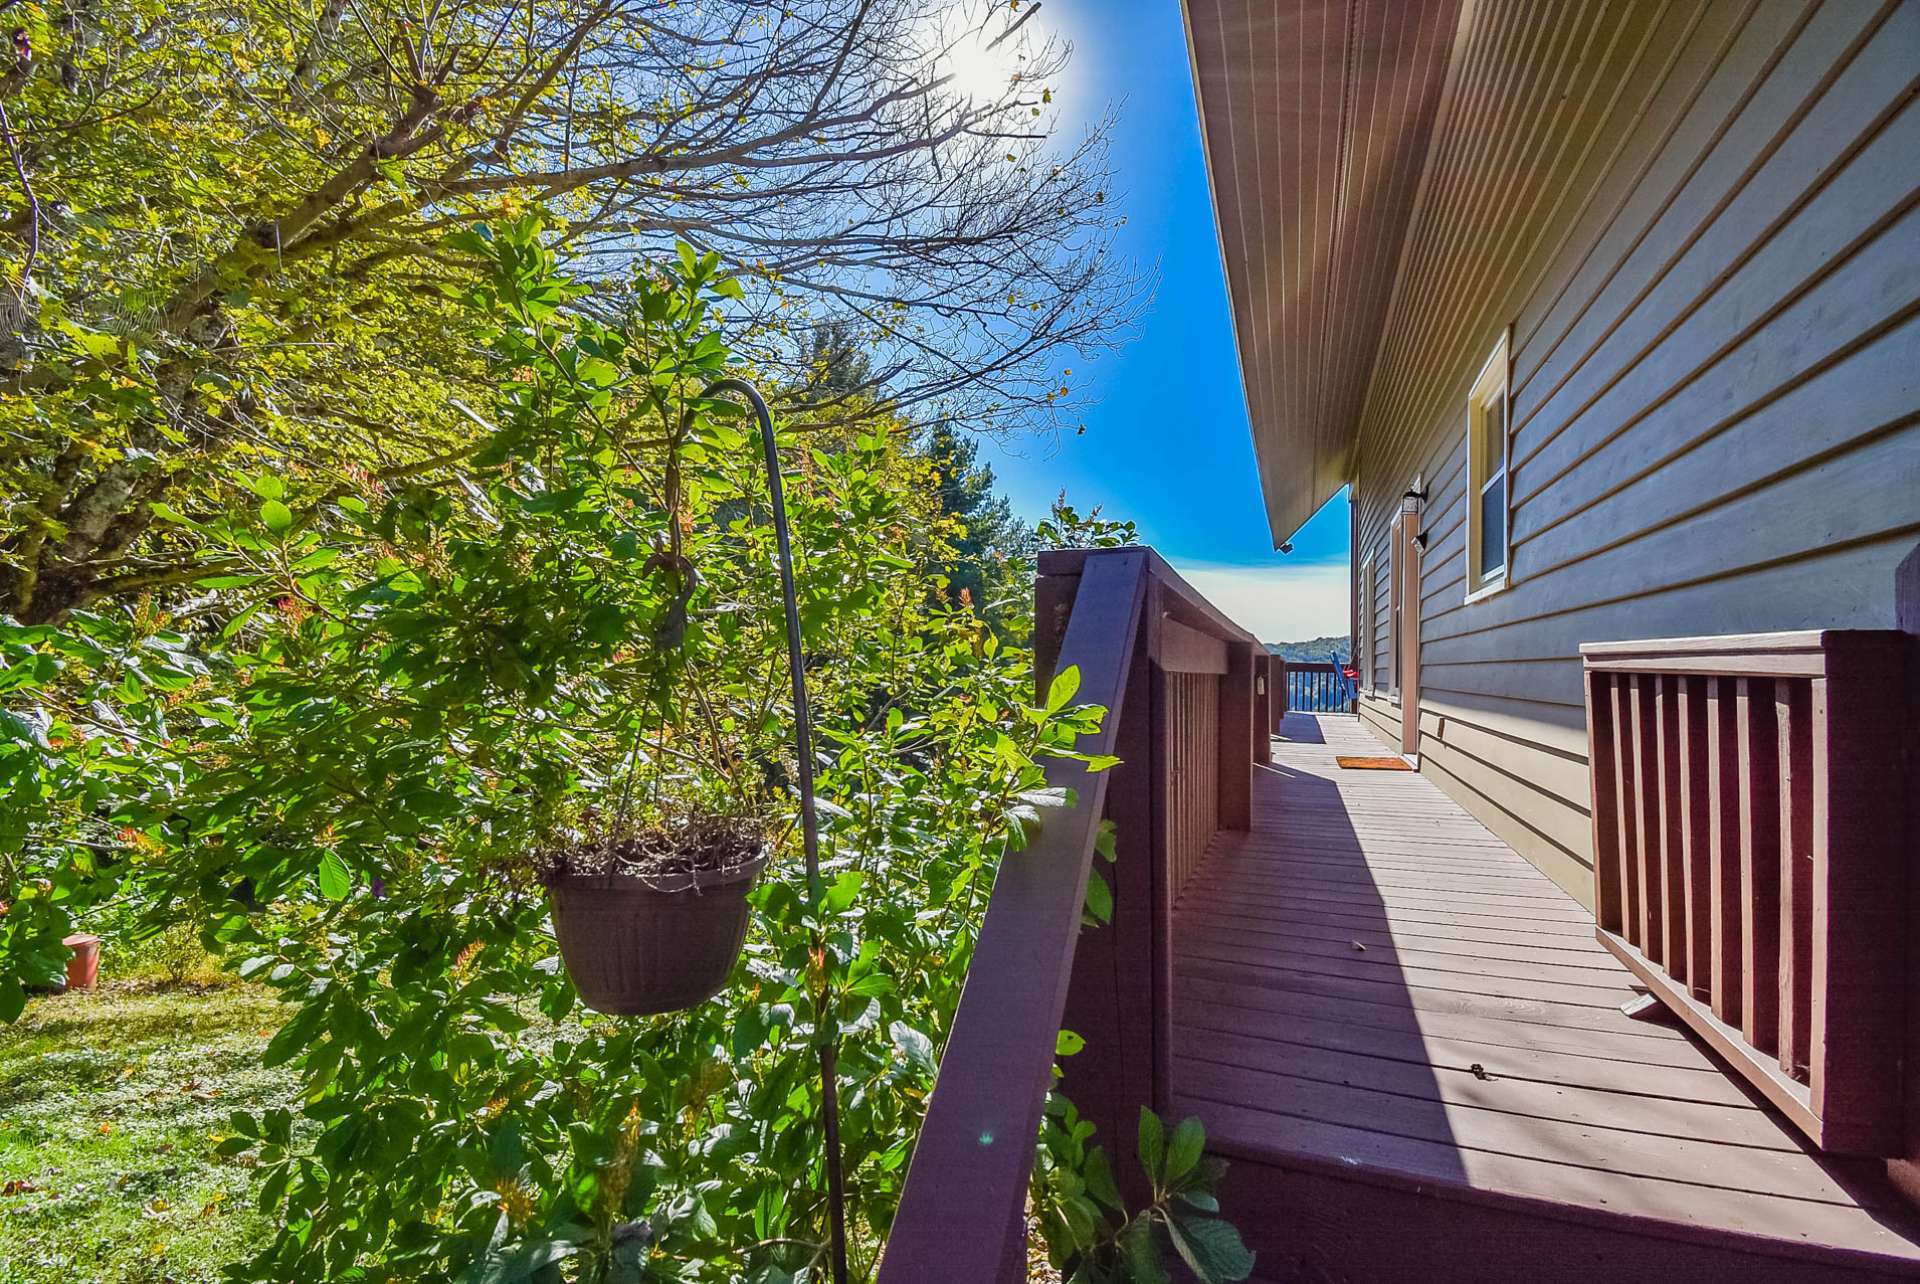 A partially covered deck wraps around three sides of the home.